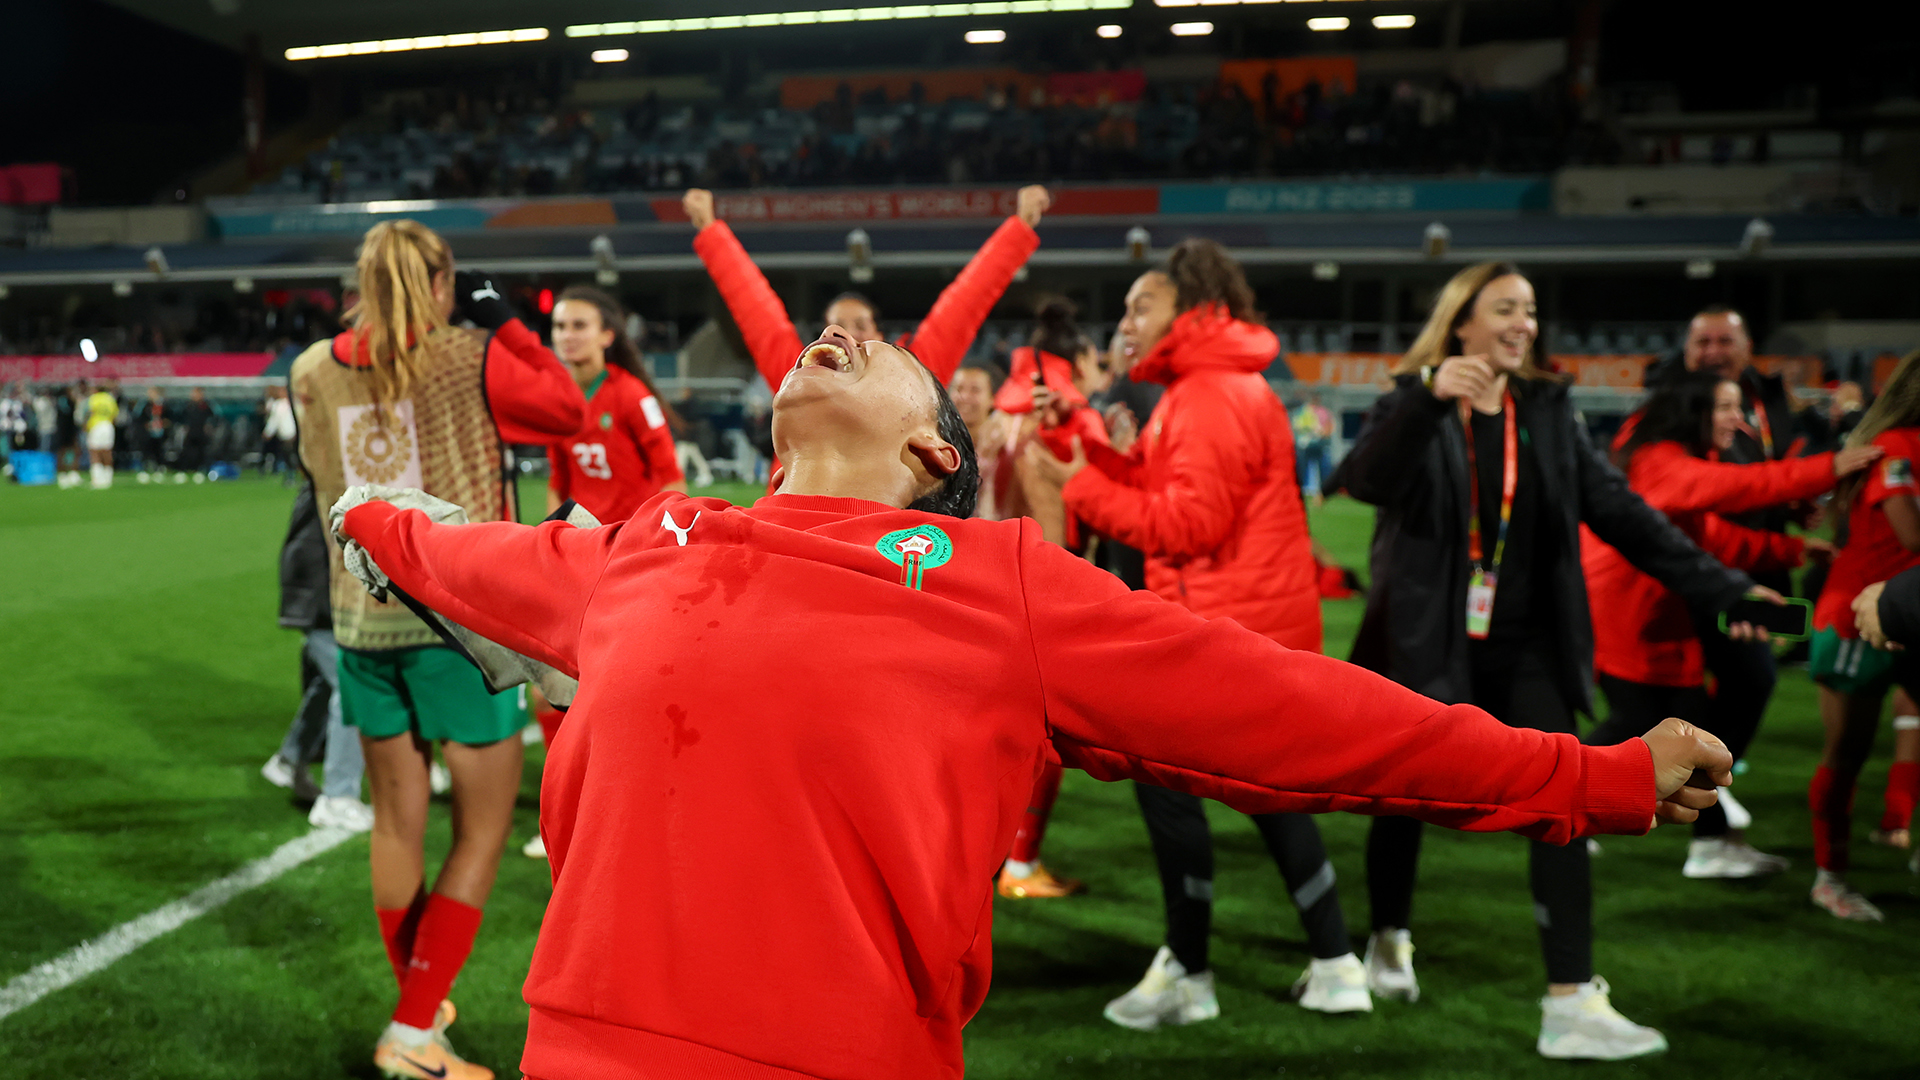 Sofia Bouftini and Morocco players celebrate advancing to the knock out stage after the 1-0 victory in the FIFA Women's World Cup Australia &amp; New Zealand 2023 Group H match between Morocco and Colombia at Perth Rectangular Stadium on August 03, 2023 in Perth, Australia.